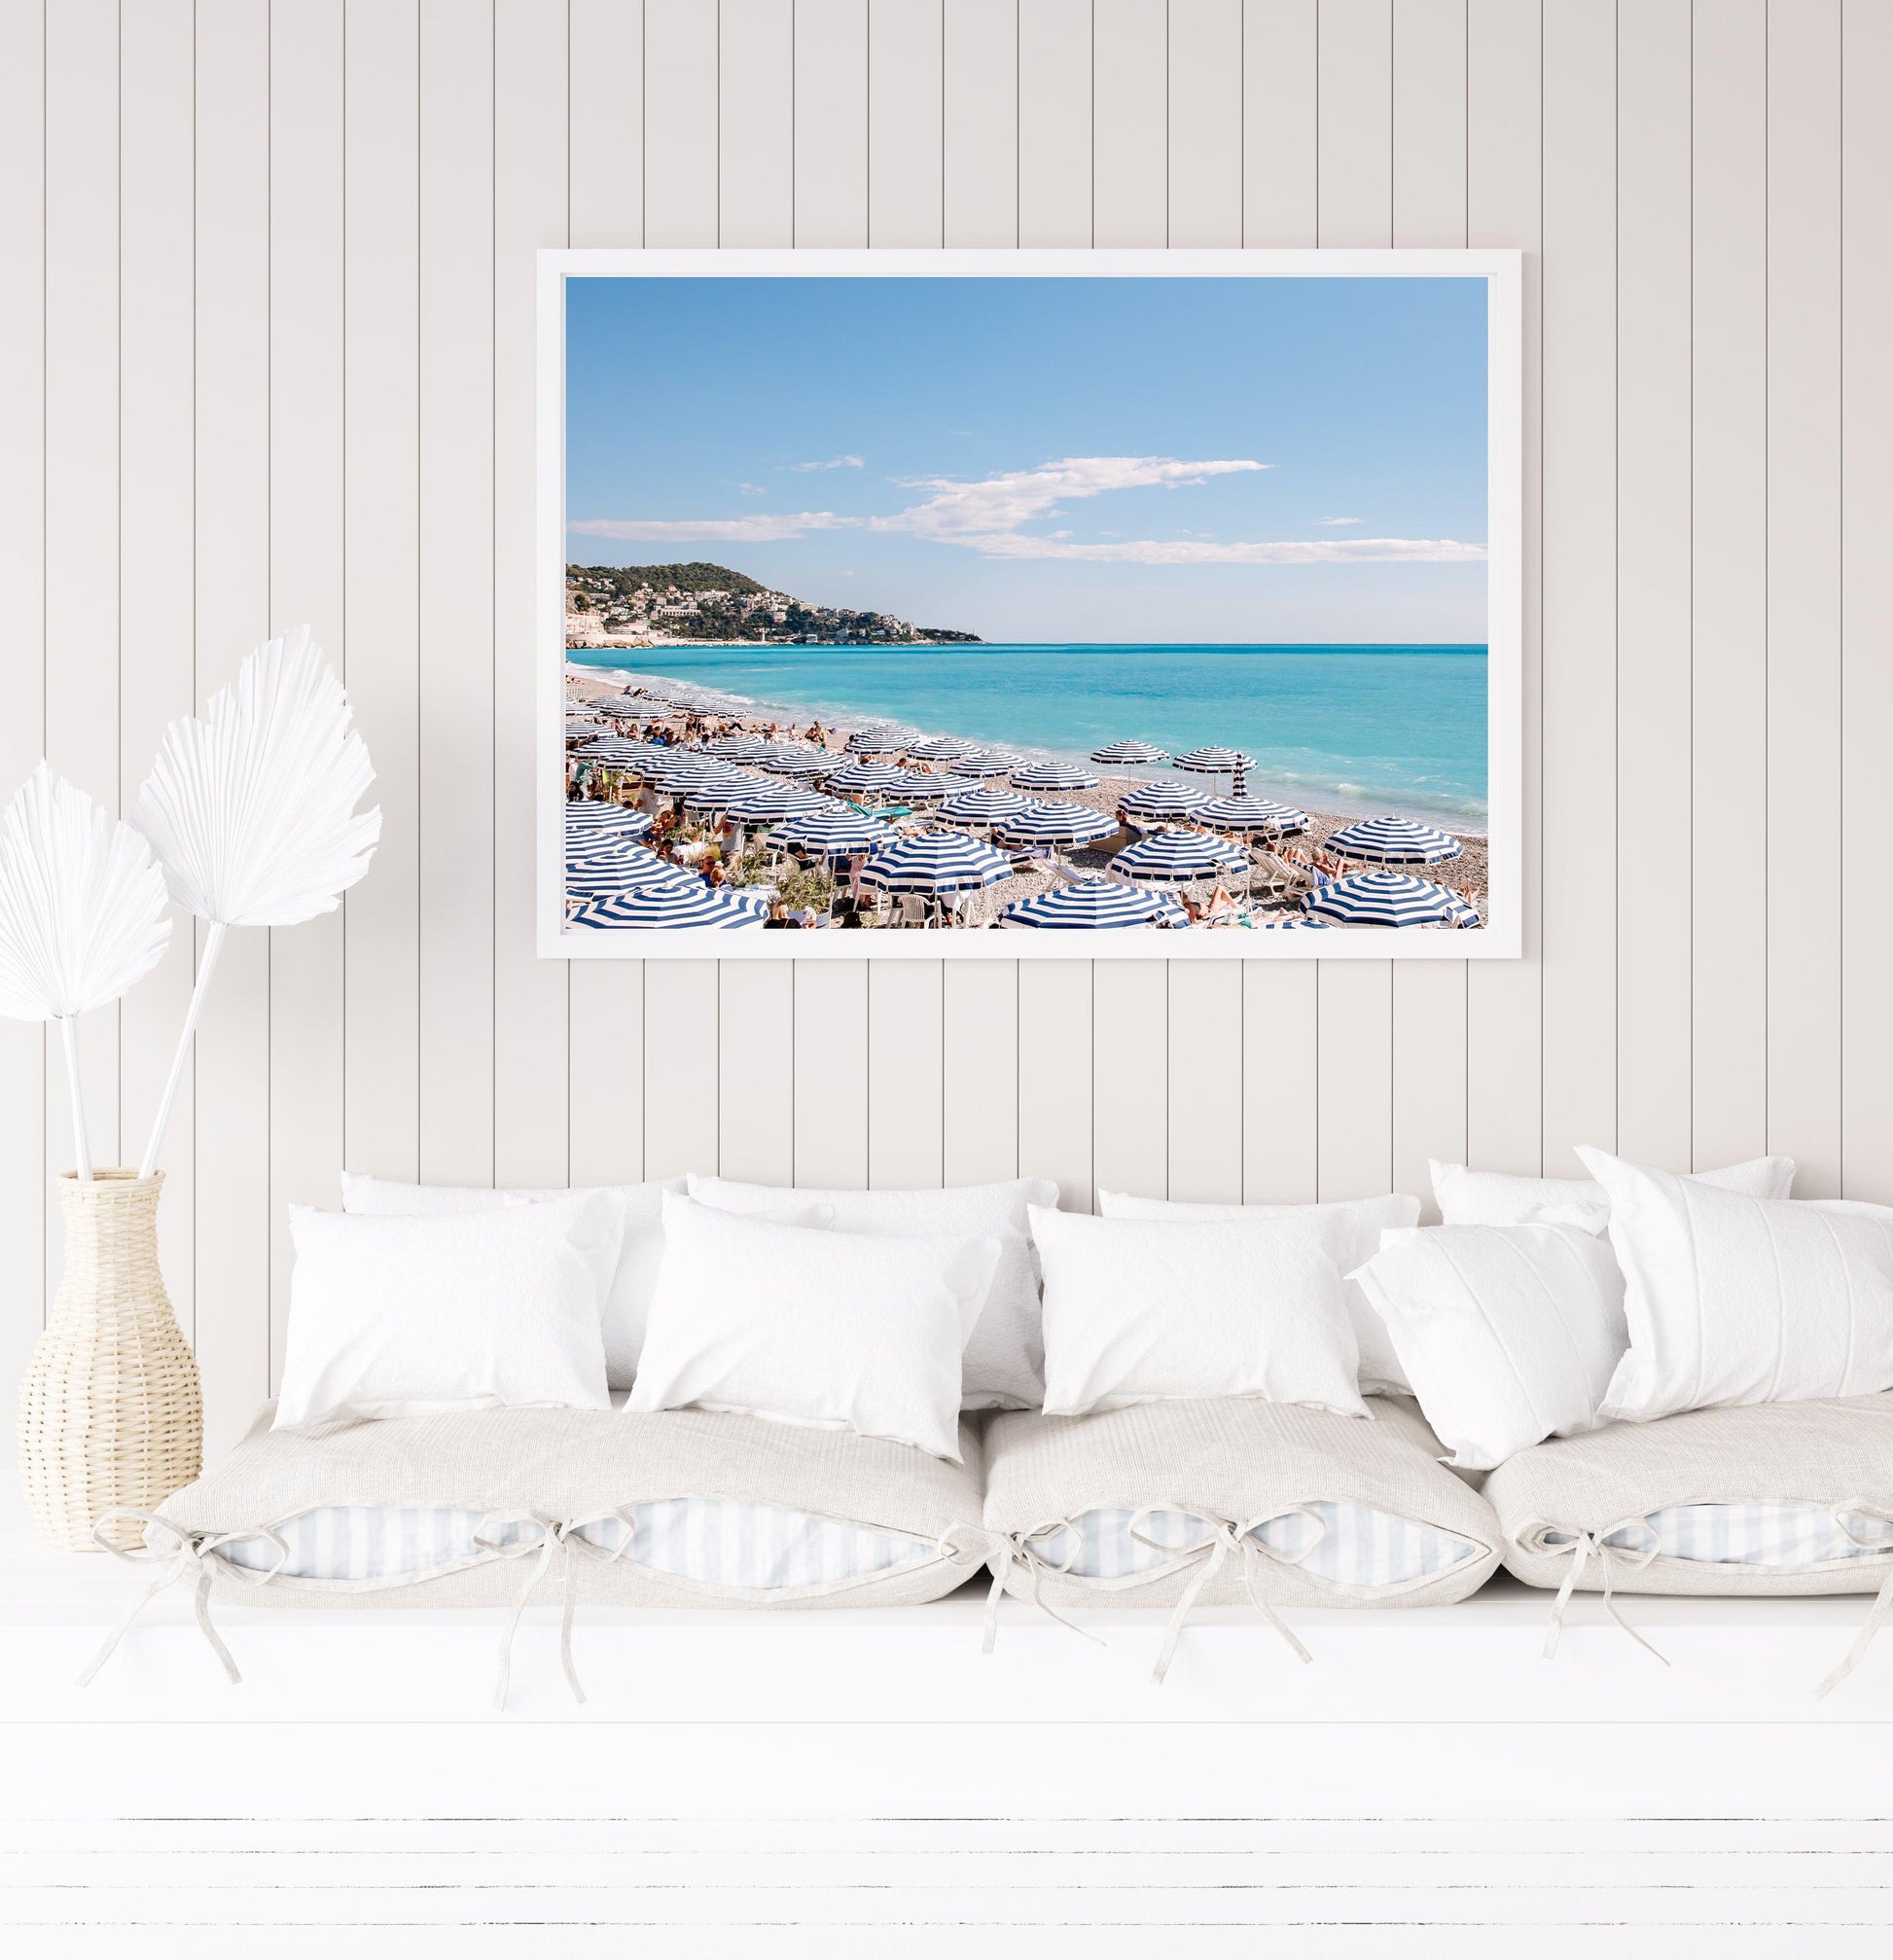 Blue and White Striped Beach Umbrellas | French Riviera Print - Departures Print Shop